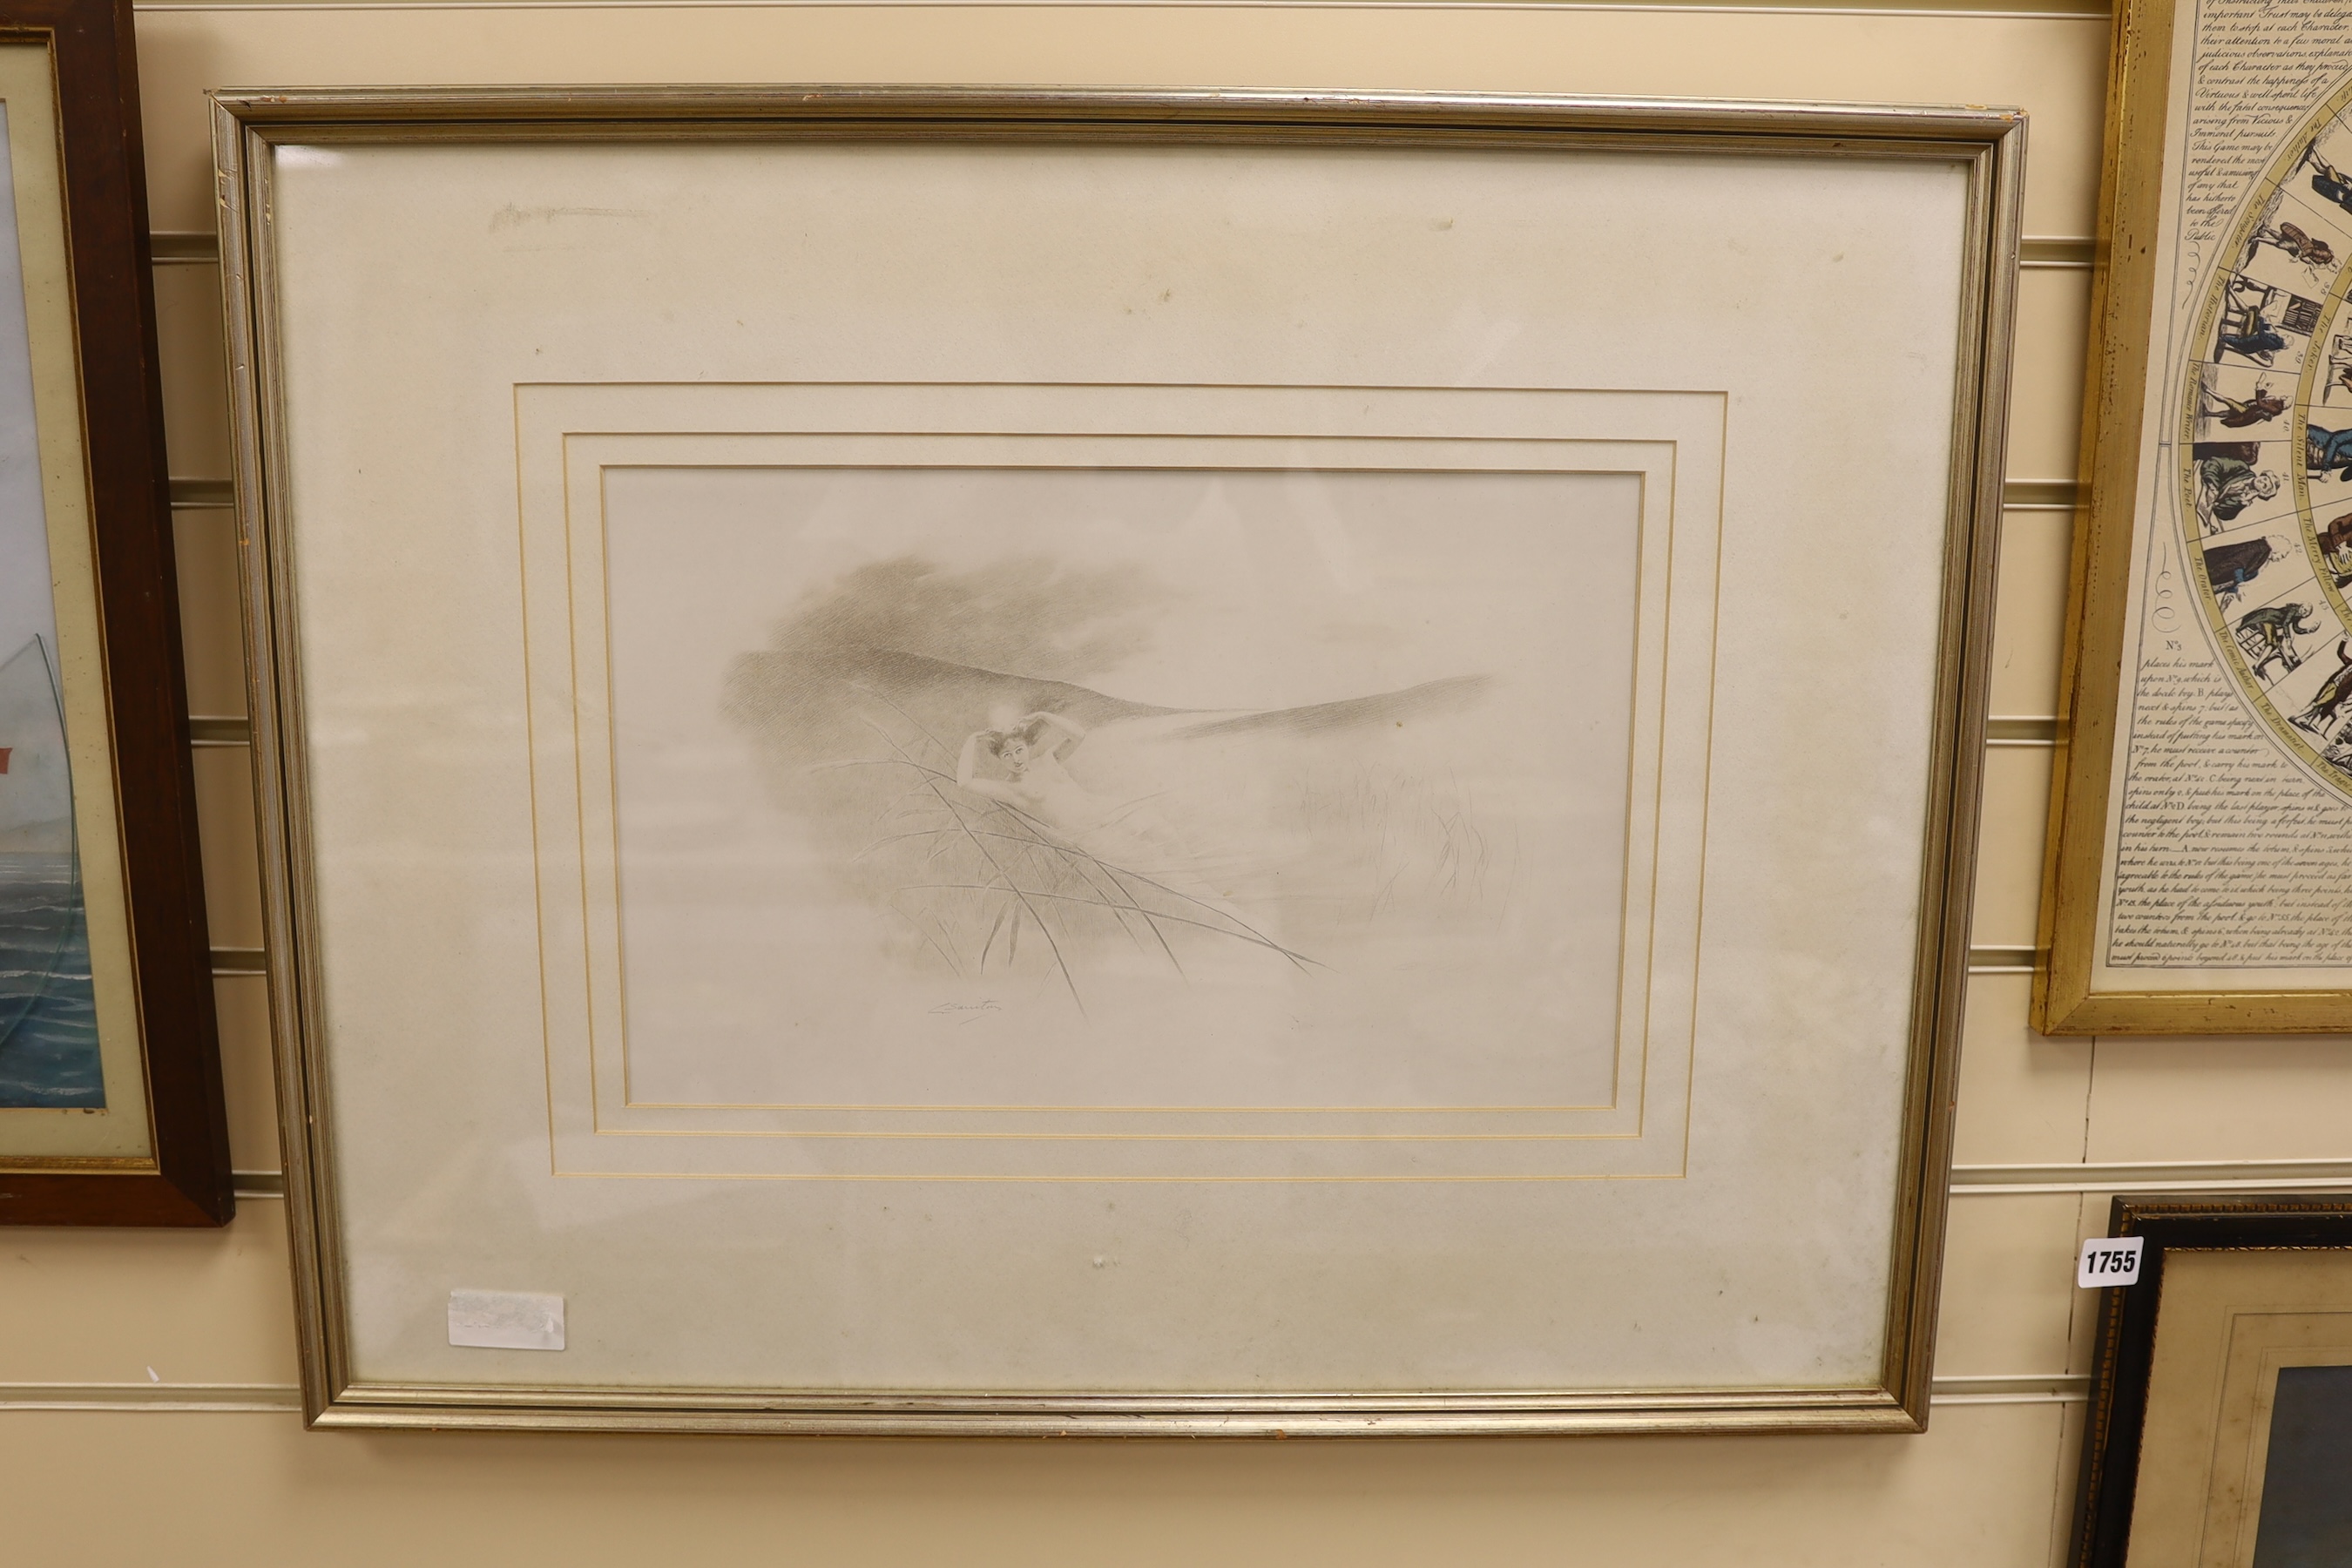 Charles Prosper Sainton (1861-1914), silverpoint, Woman amongst reeds, signed in the plate, 26 x 42cm